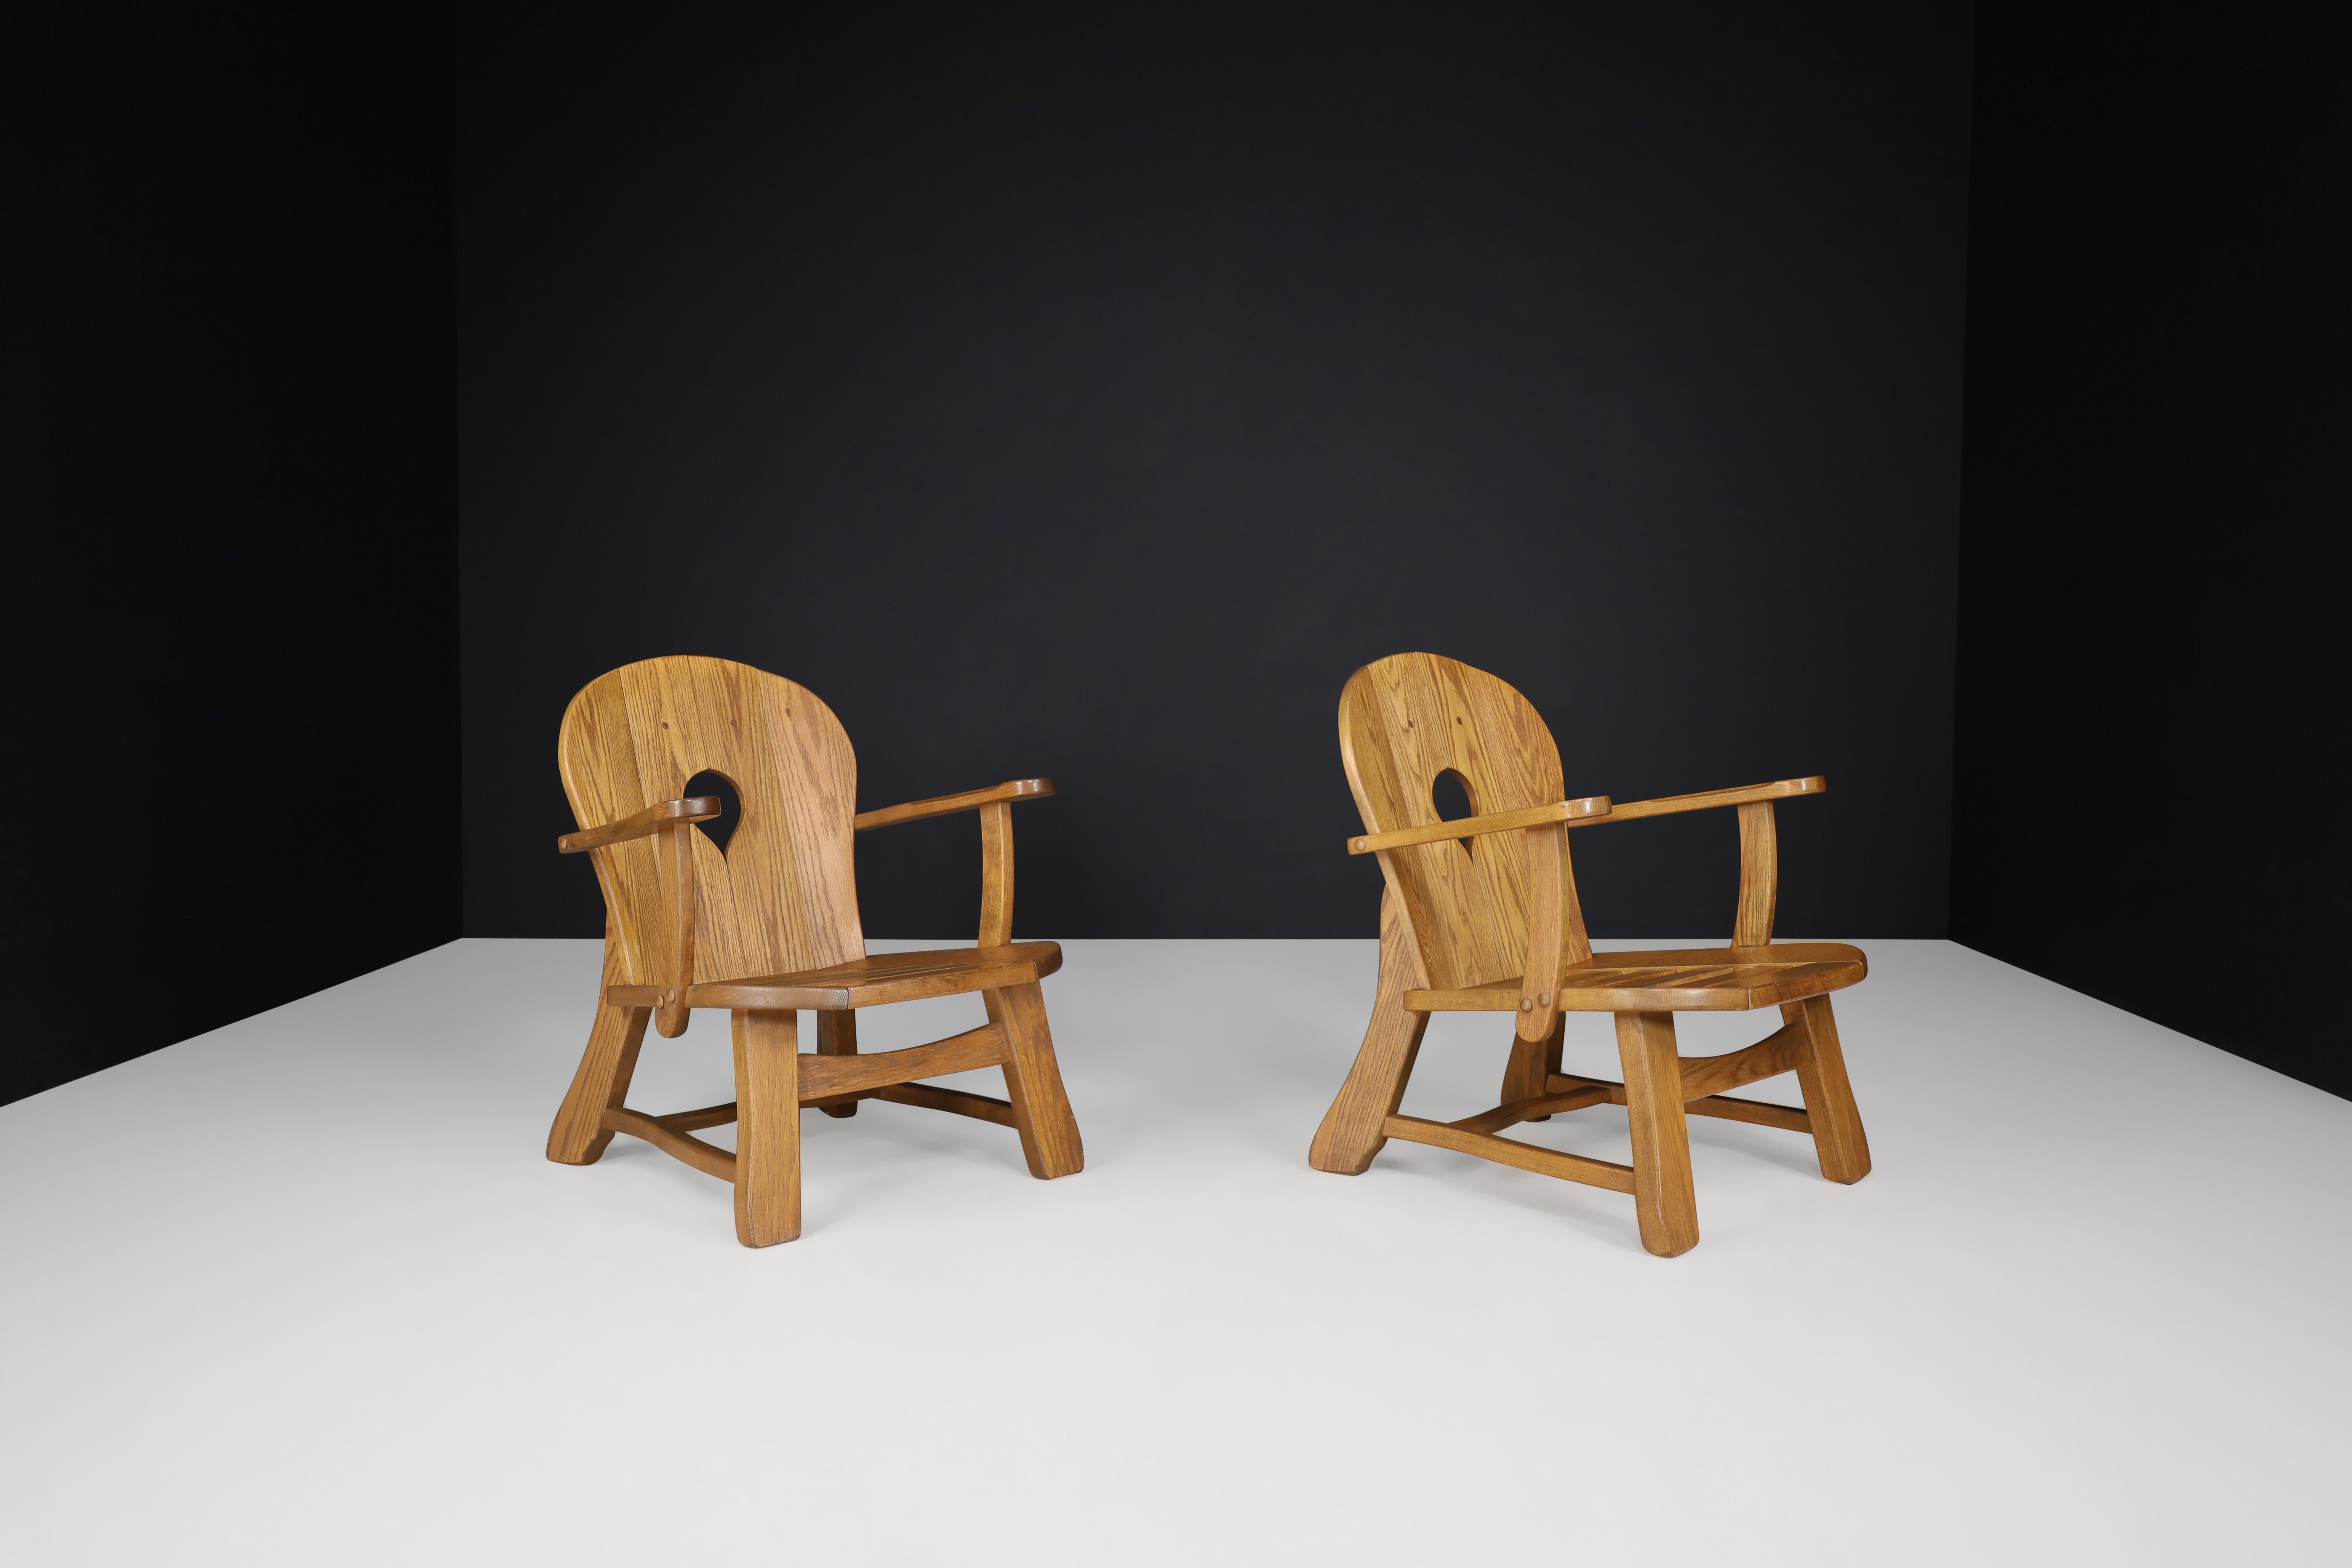 Sculptural Lounge Chairs in Oak, France, 1960s For Sale 8